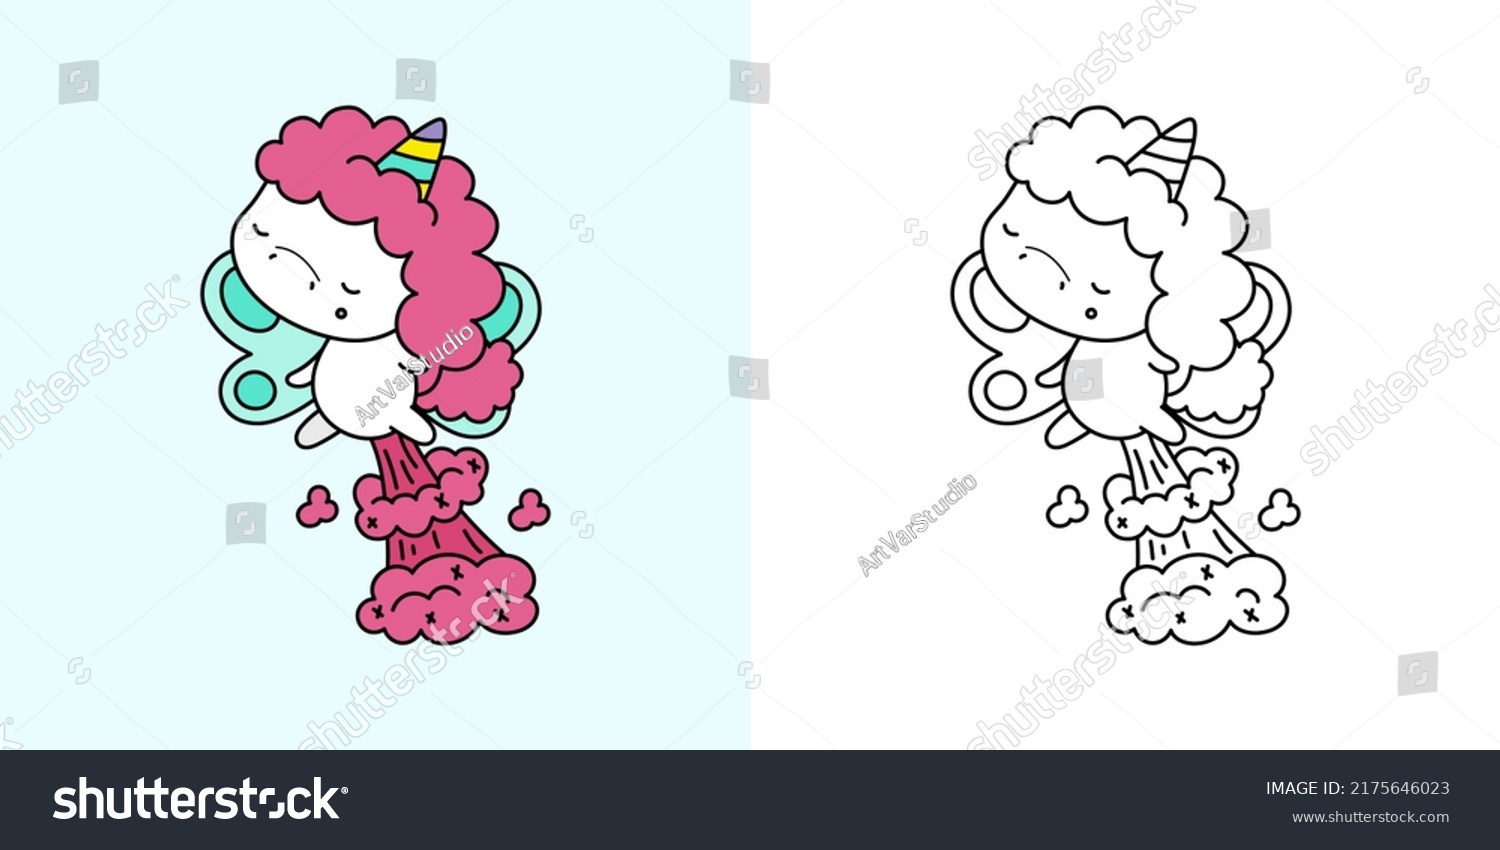 SVG of Set Clipart Unicorn Multicolored and Black and White Kawaii Clip Art Unicorn. Vector Illustration of a Kawaii for Prints for Clothes, Stickers, Baby Shower, Coloring Pages.  svg